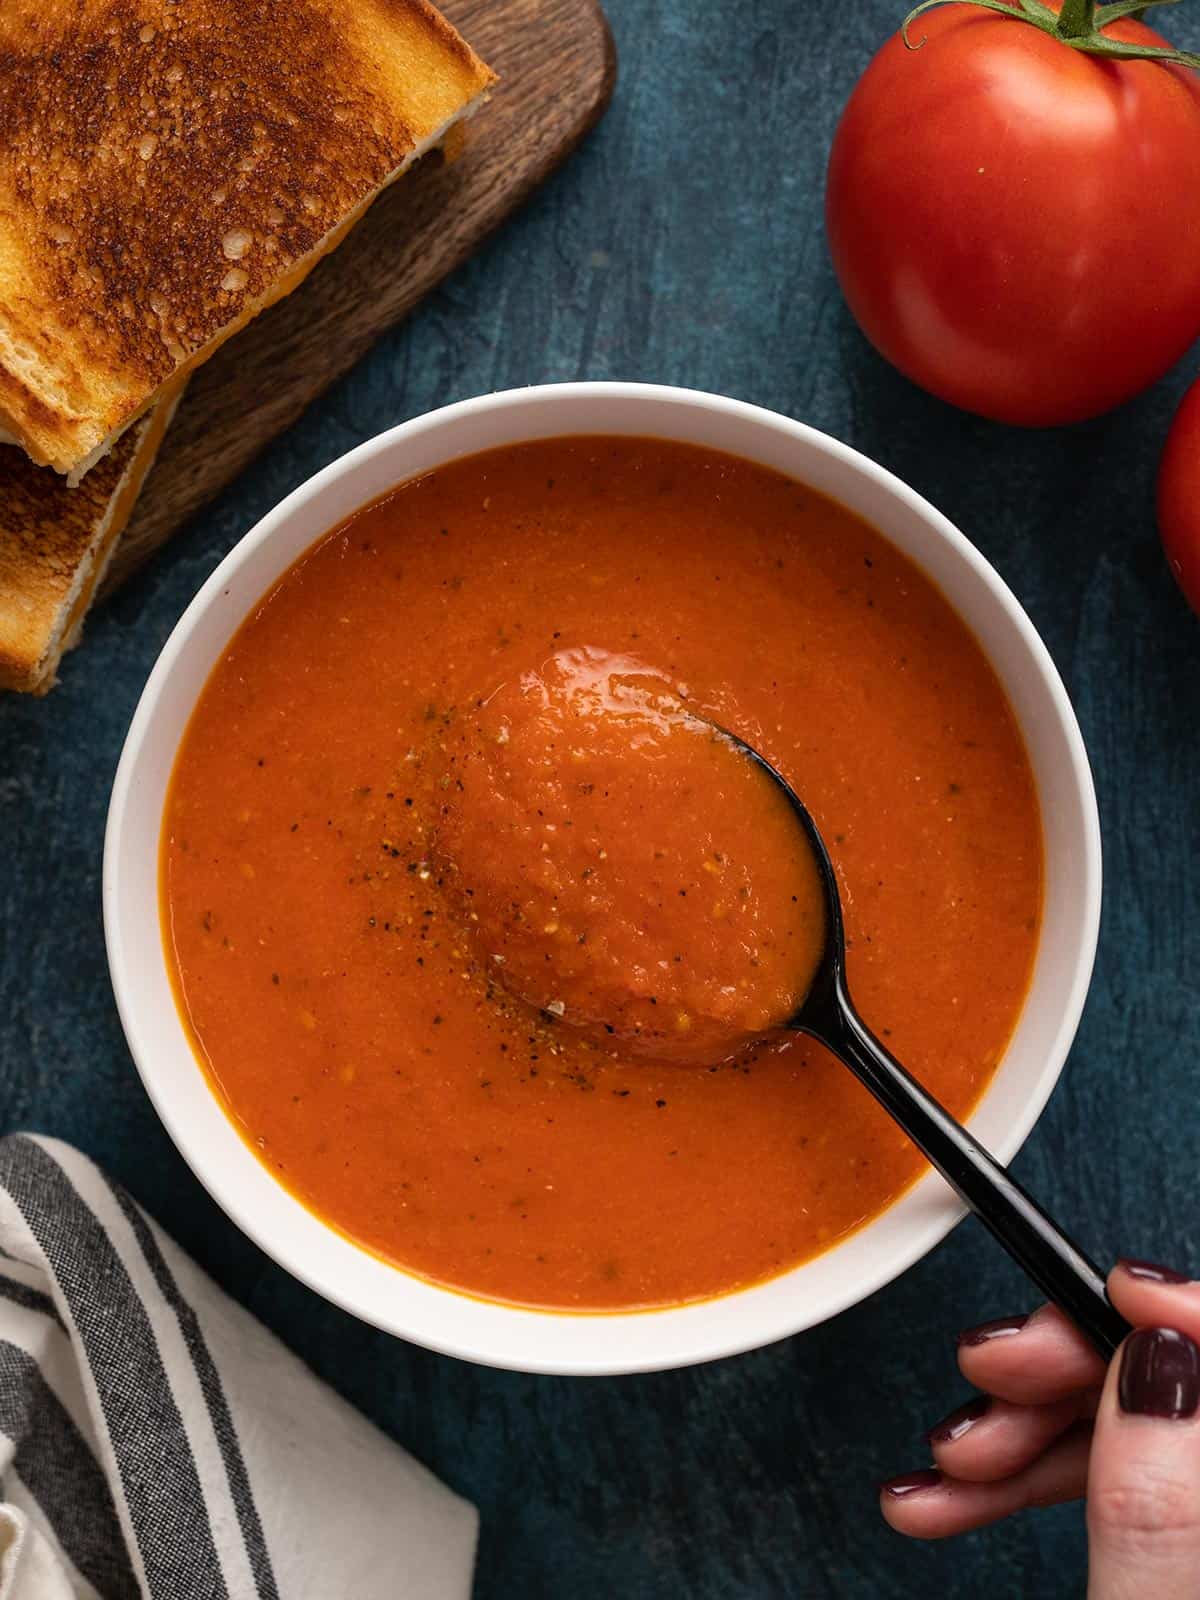 Overhead view of a bowl of roasted tomato soup with a spoon and grilled cheese on the side.